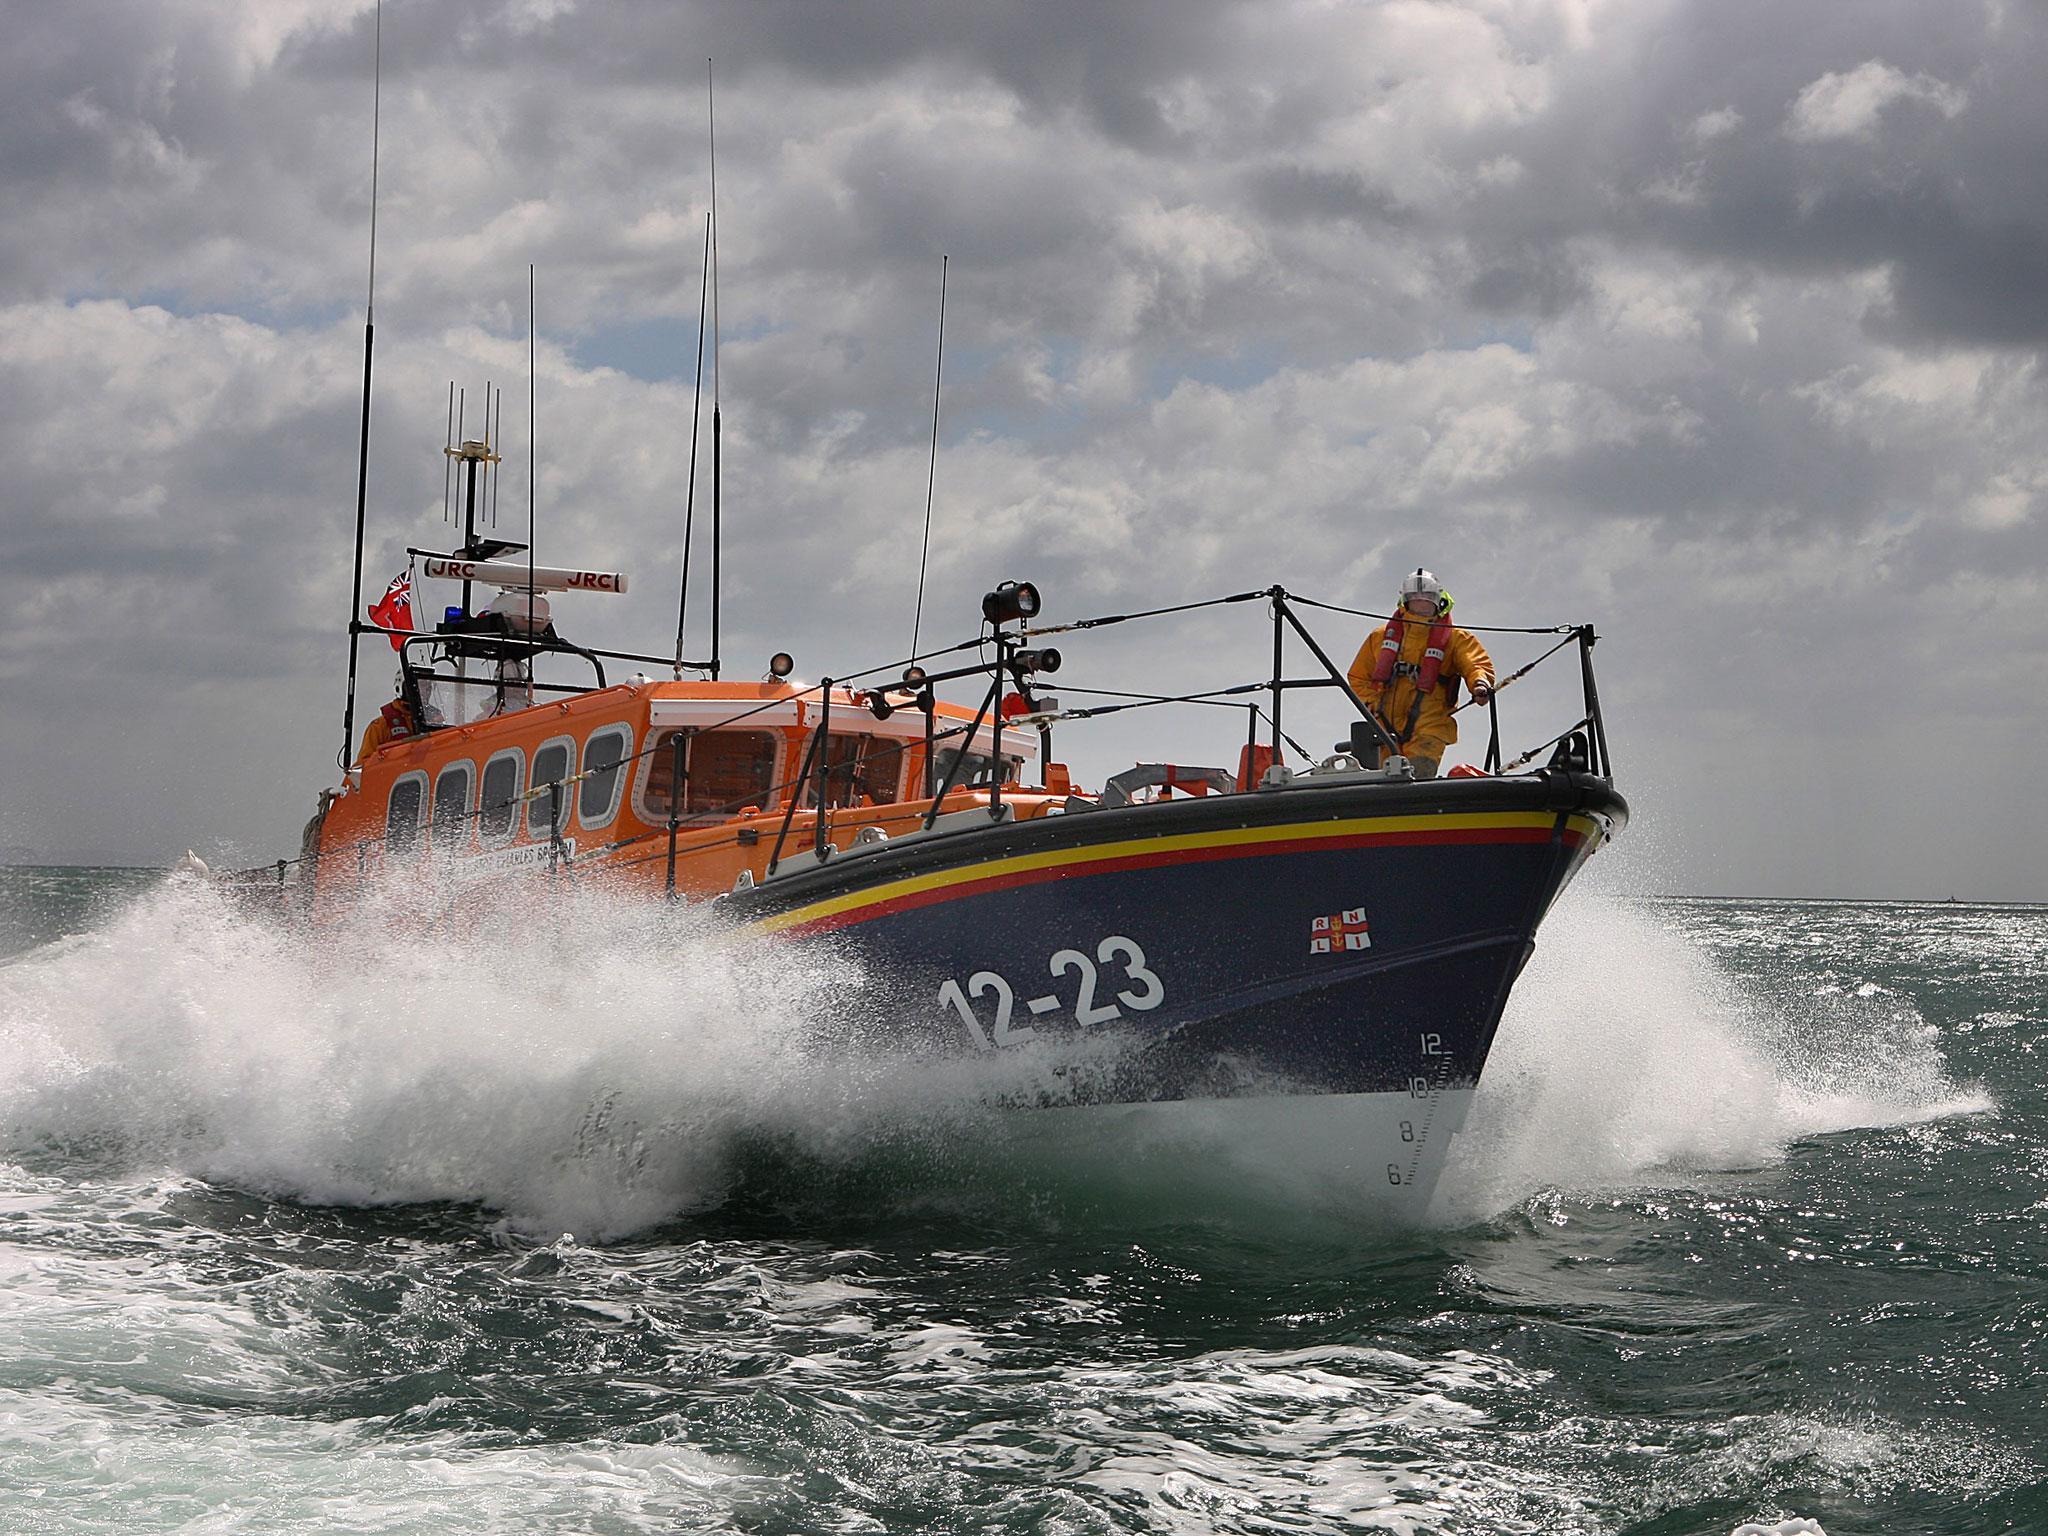 An RNLI lifeboat was involved in the rescue (file photo)